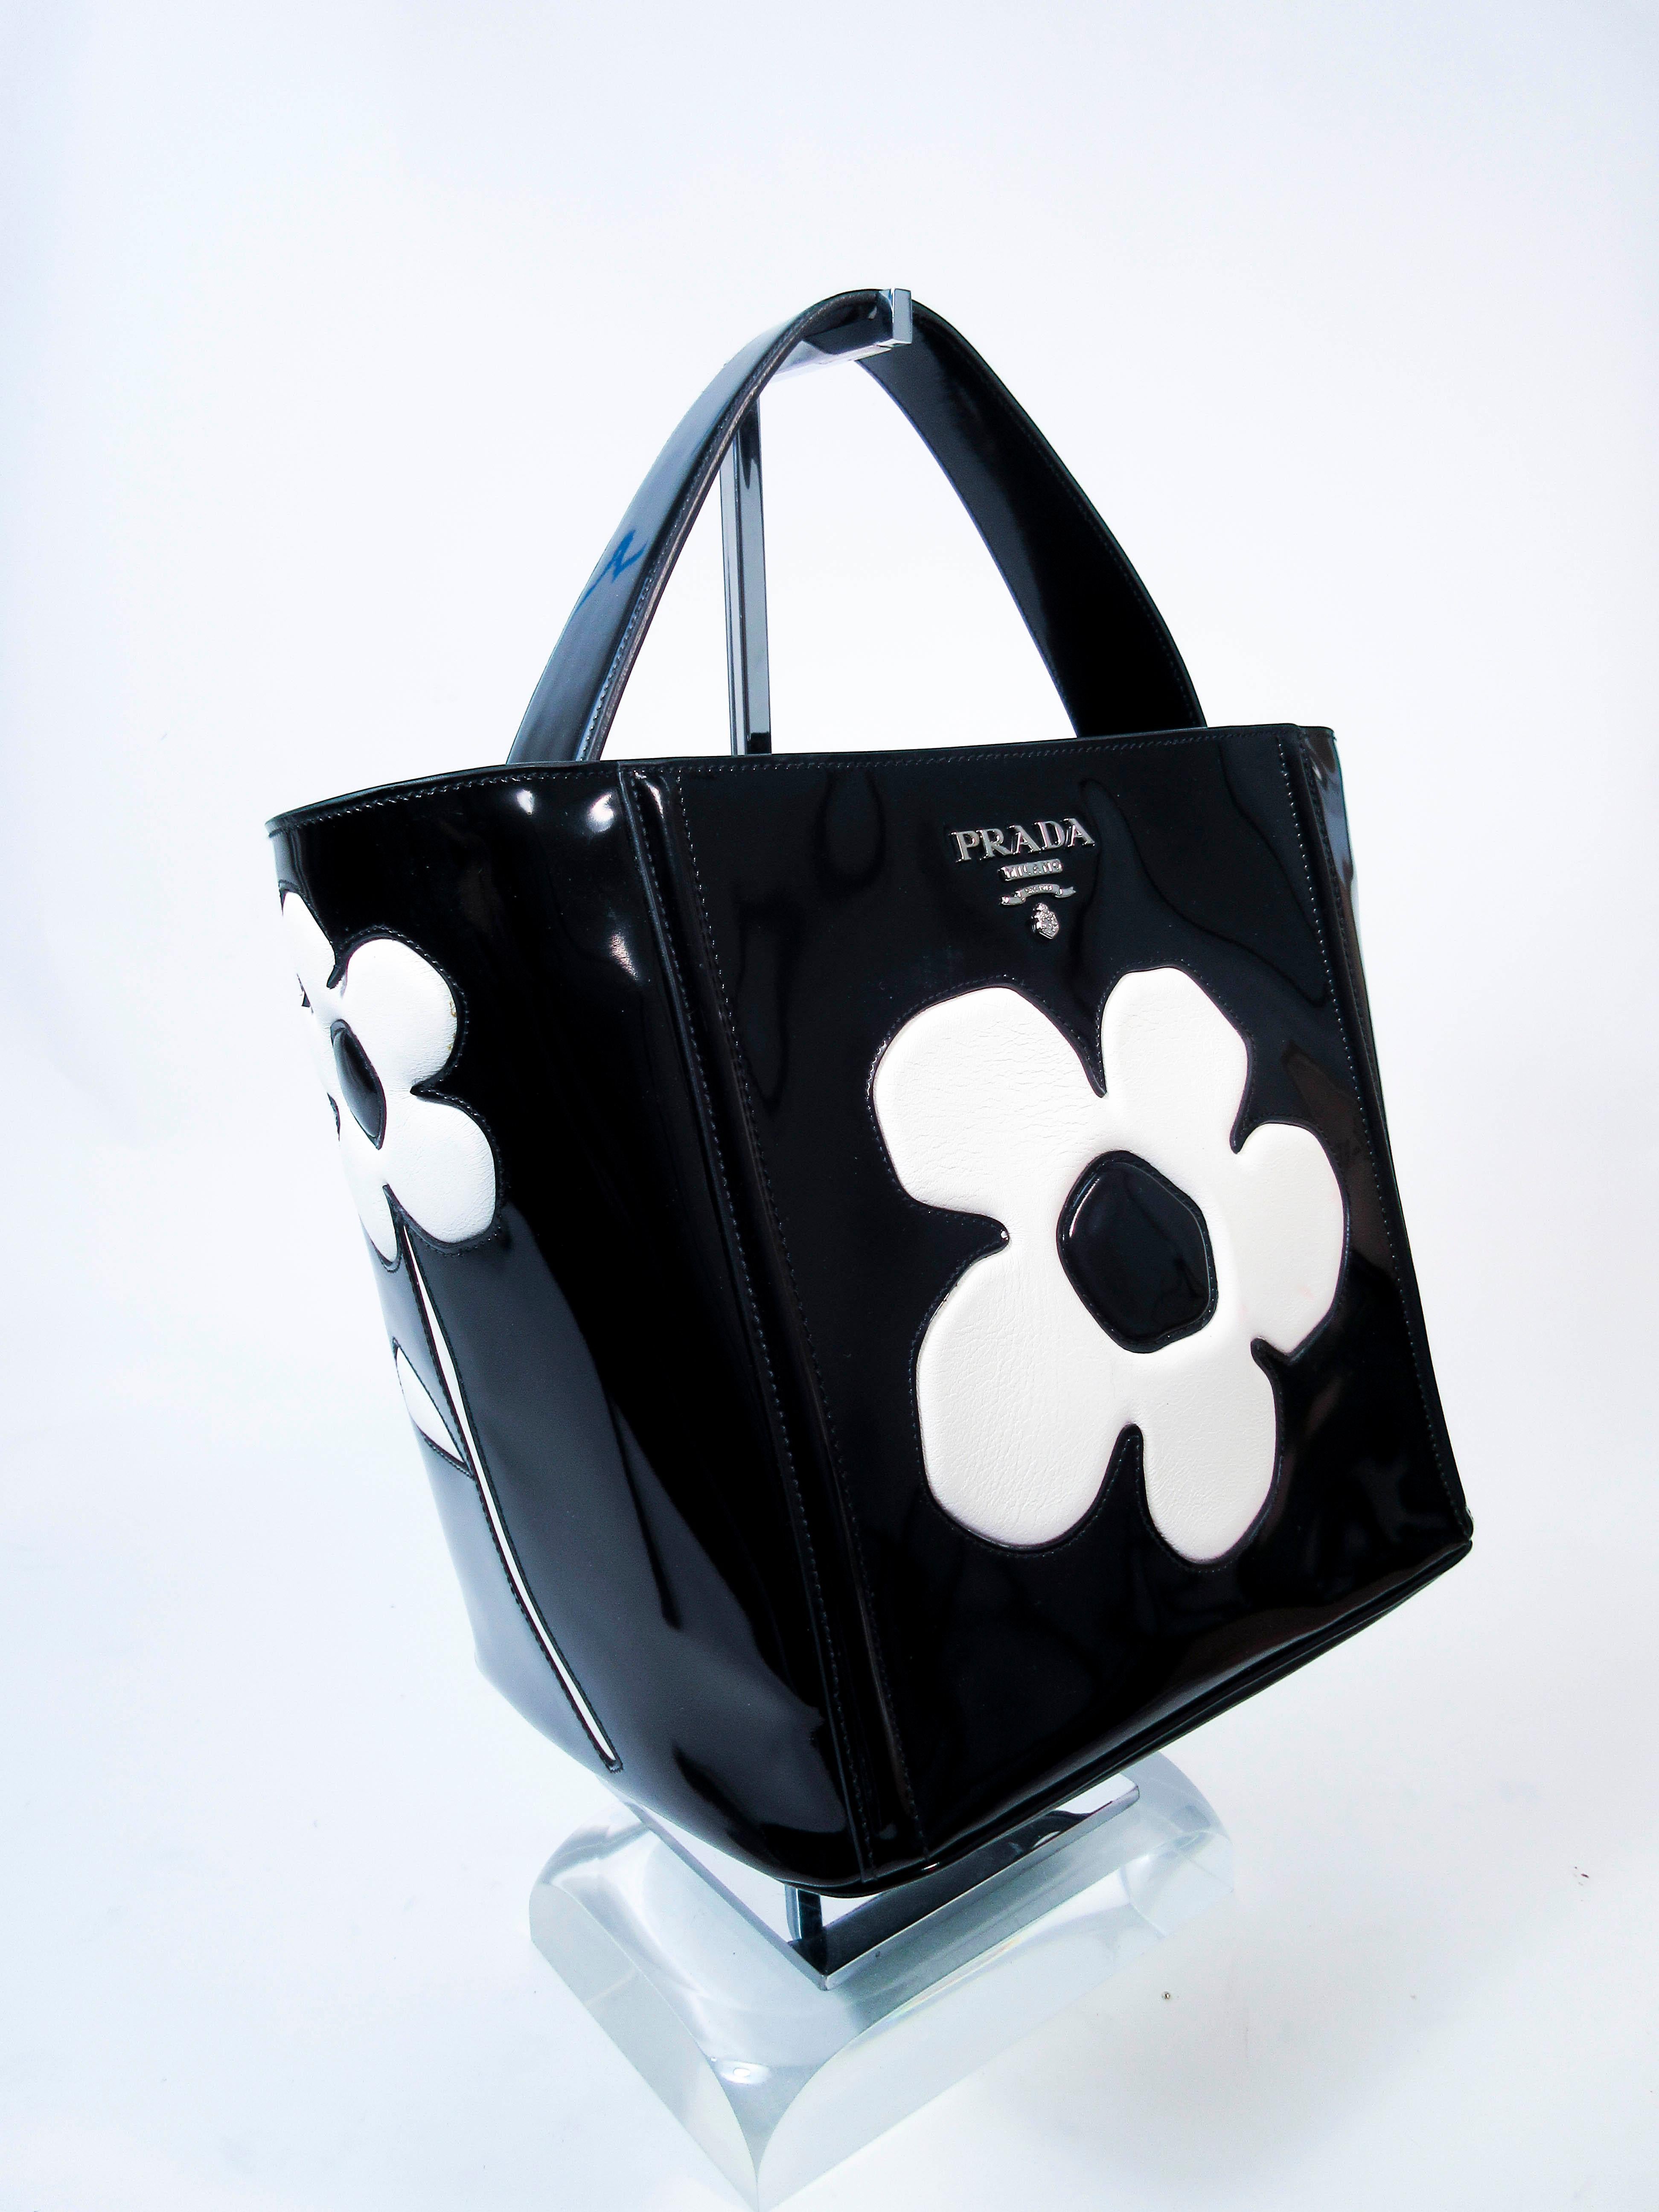 Women's Prada Black and White Patent Leather Flower Purse with Optional Shoulder Strap 